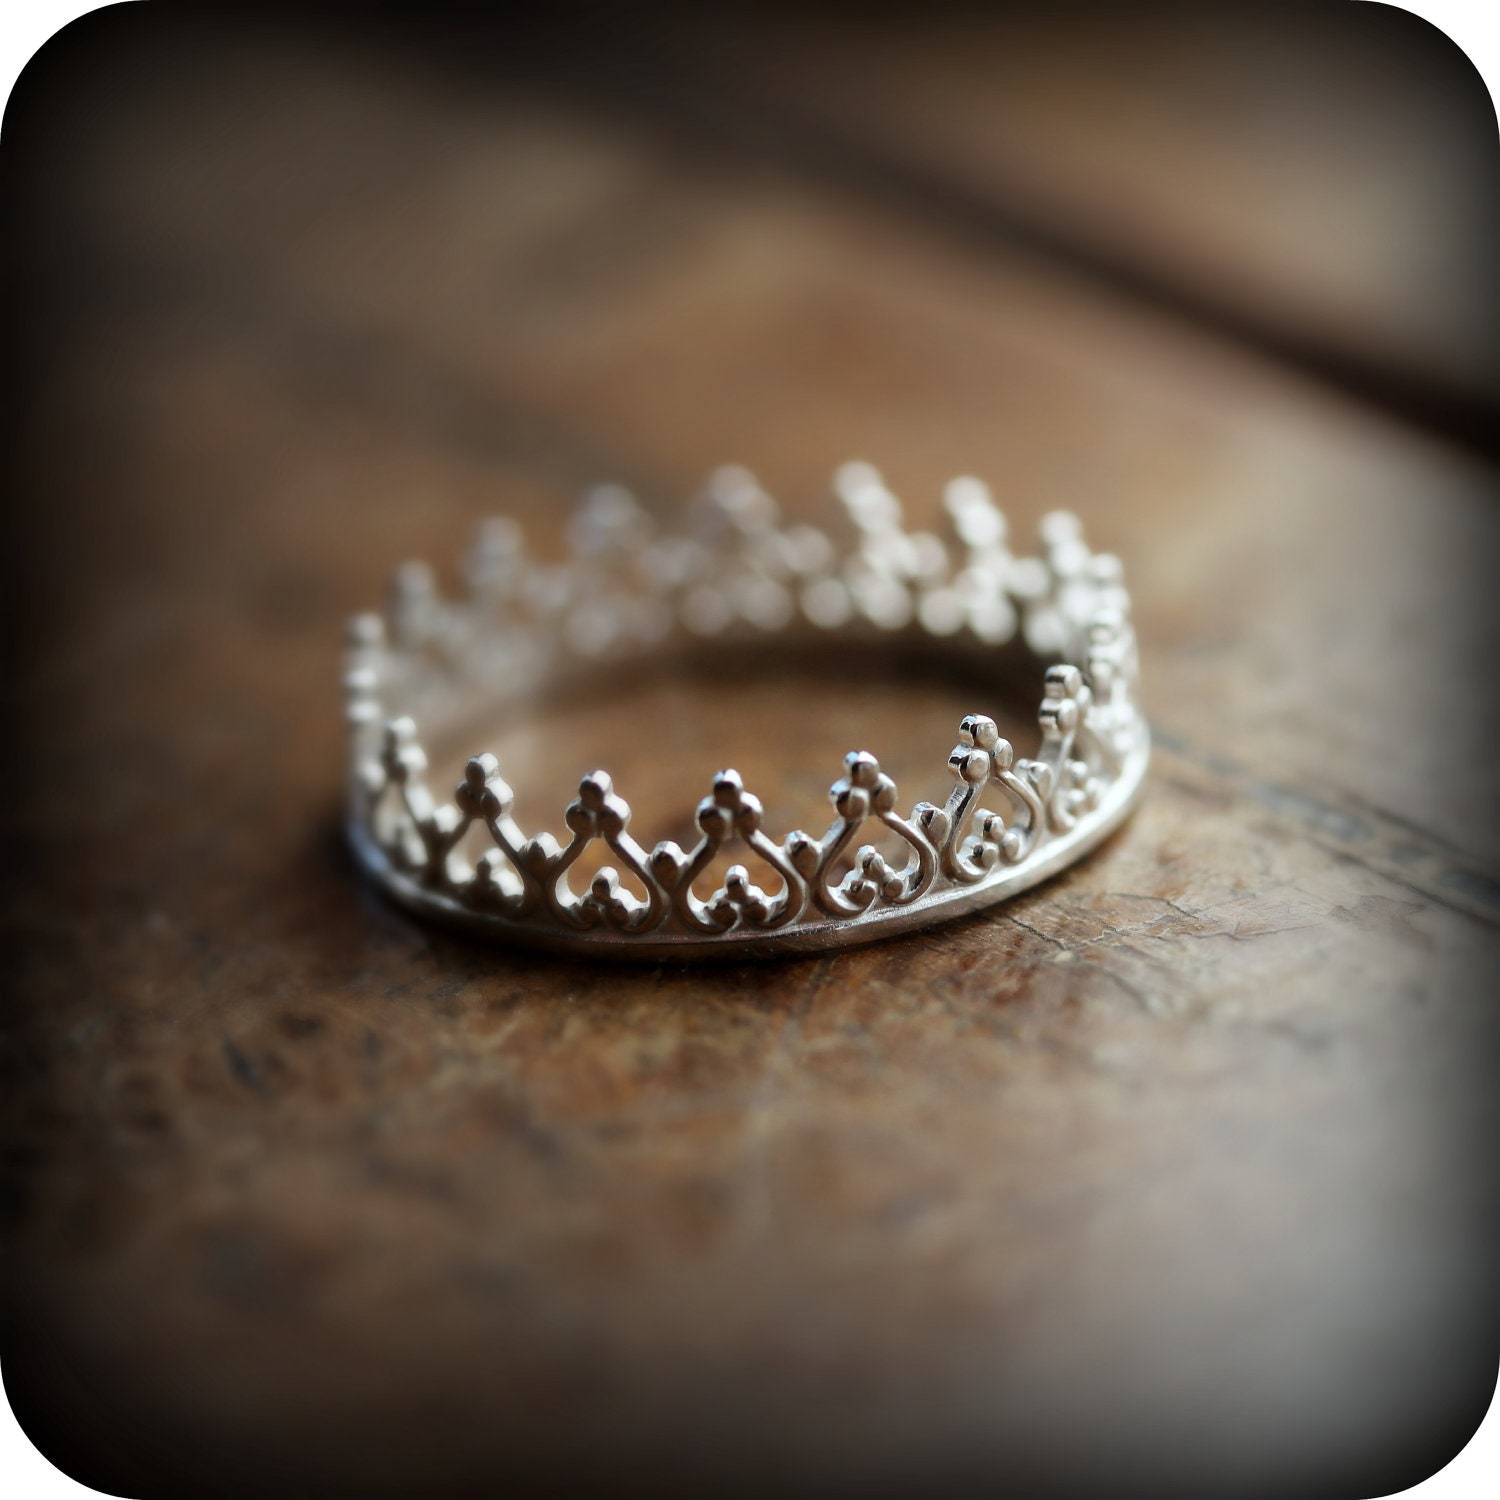 Crown ring 01 - sterling silver ring (As seen on Regretsy, haha)